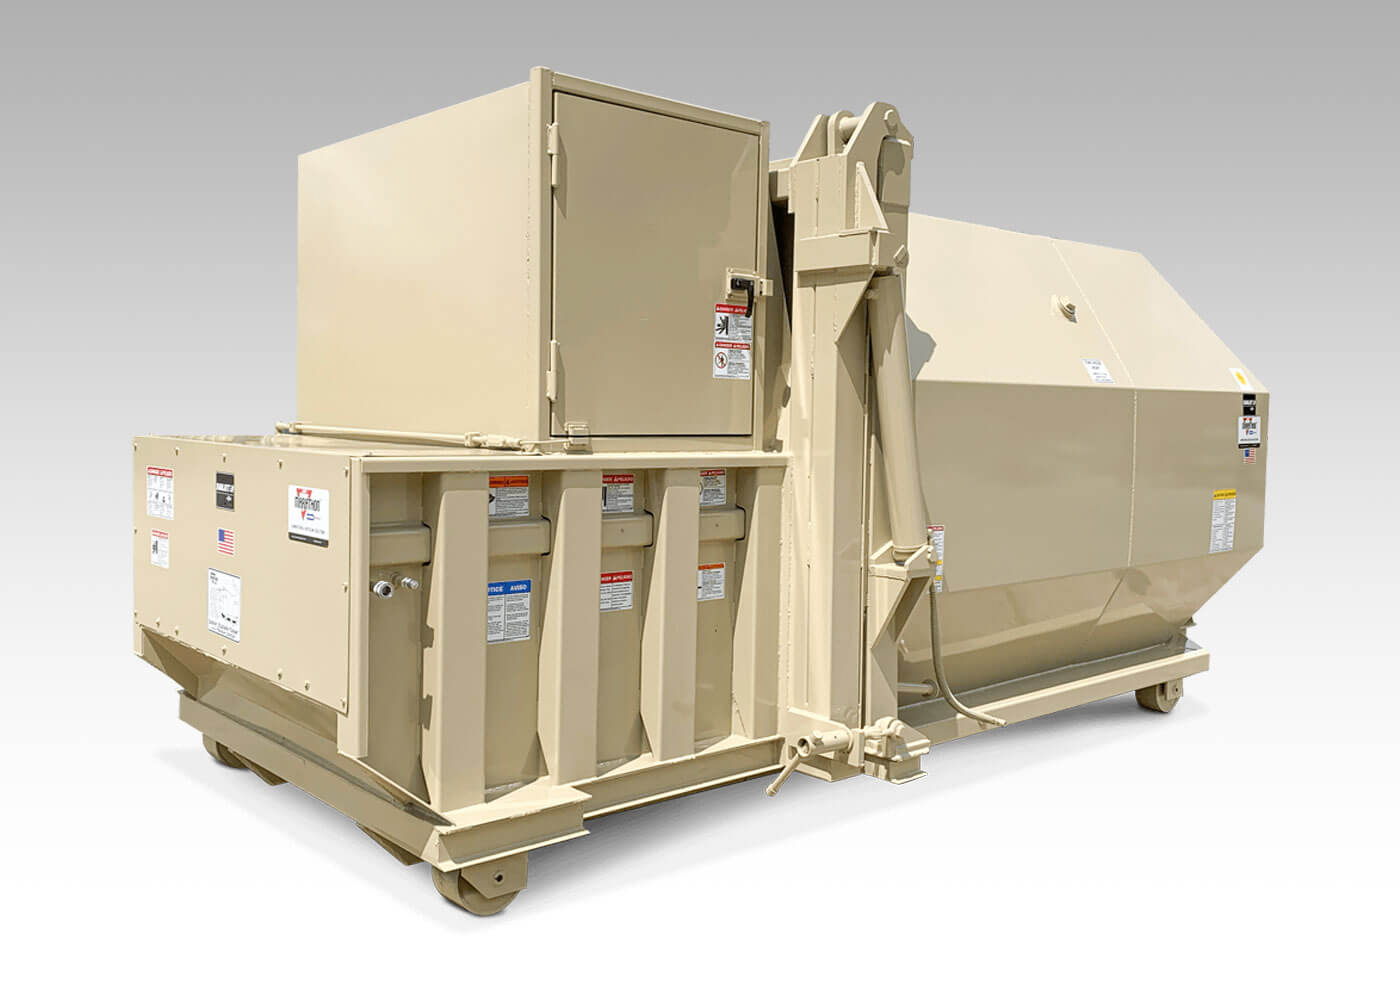 RJ-250 HT Dual compartment self contained trash compactor with two sections for multiple materials